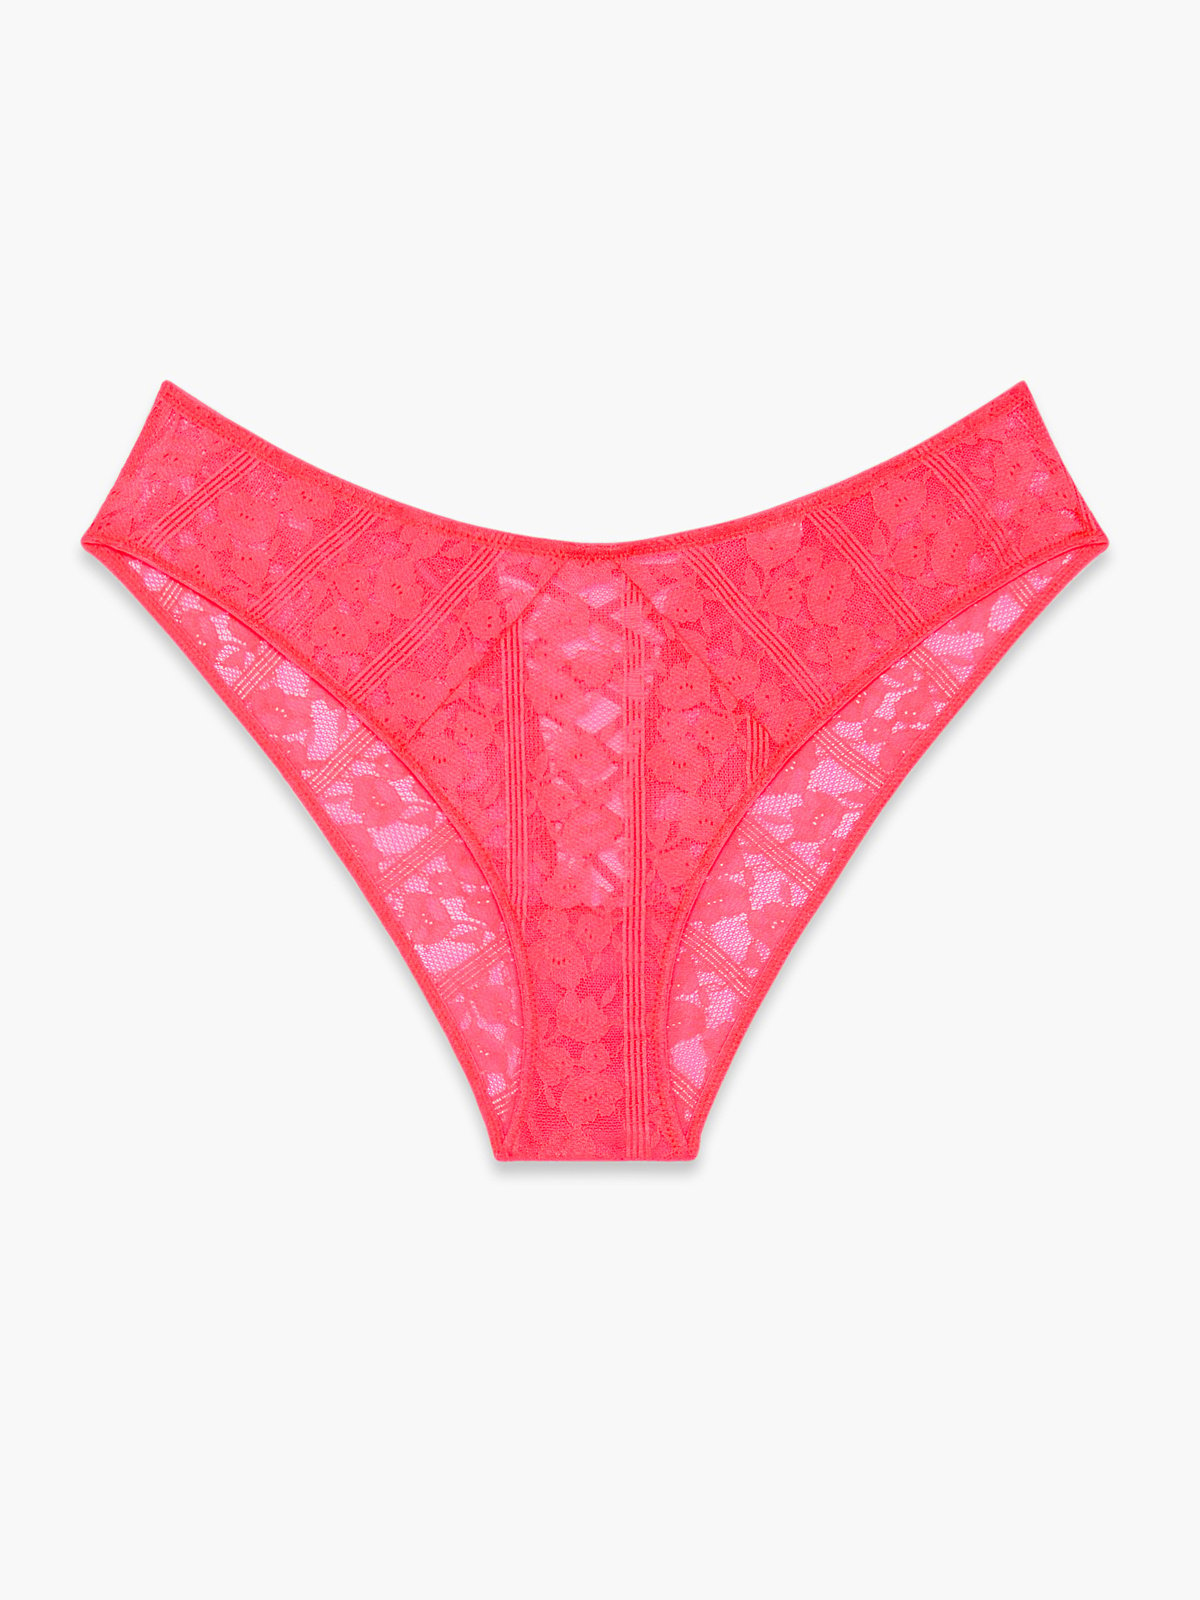 PINK Victoria's Secret Cheekster Size Small in 2023